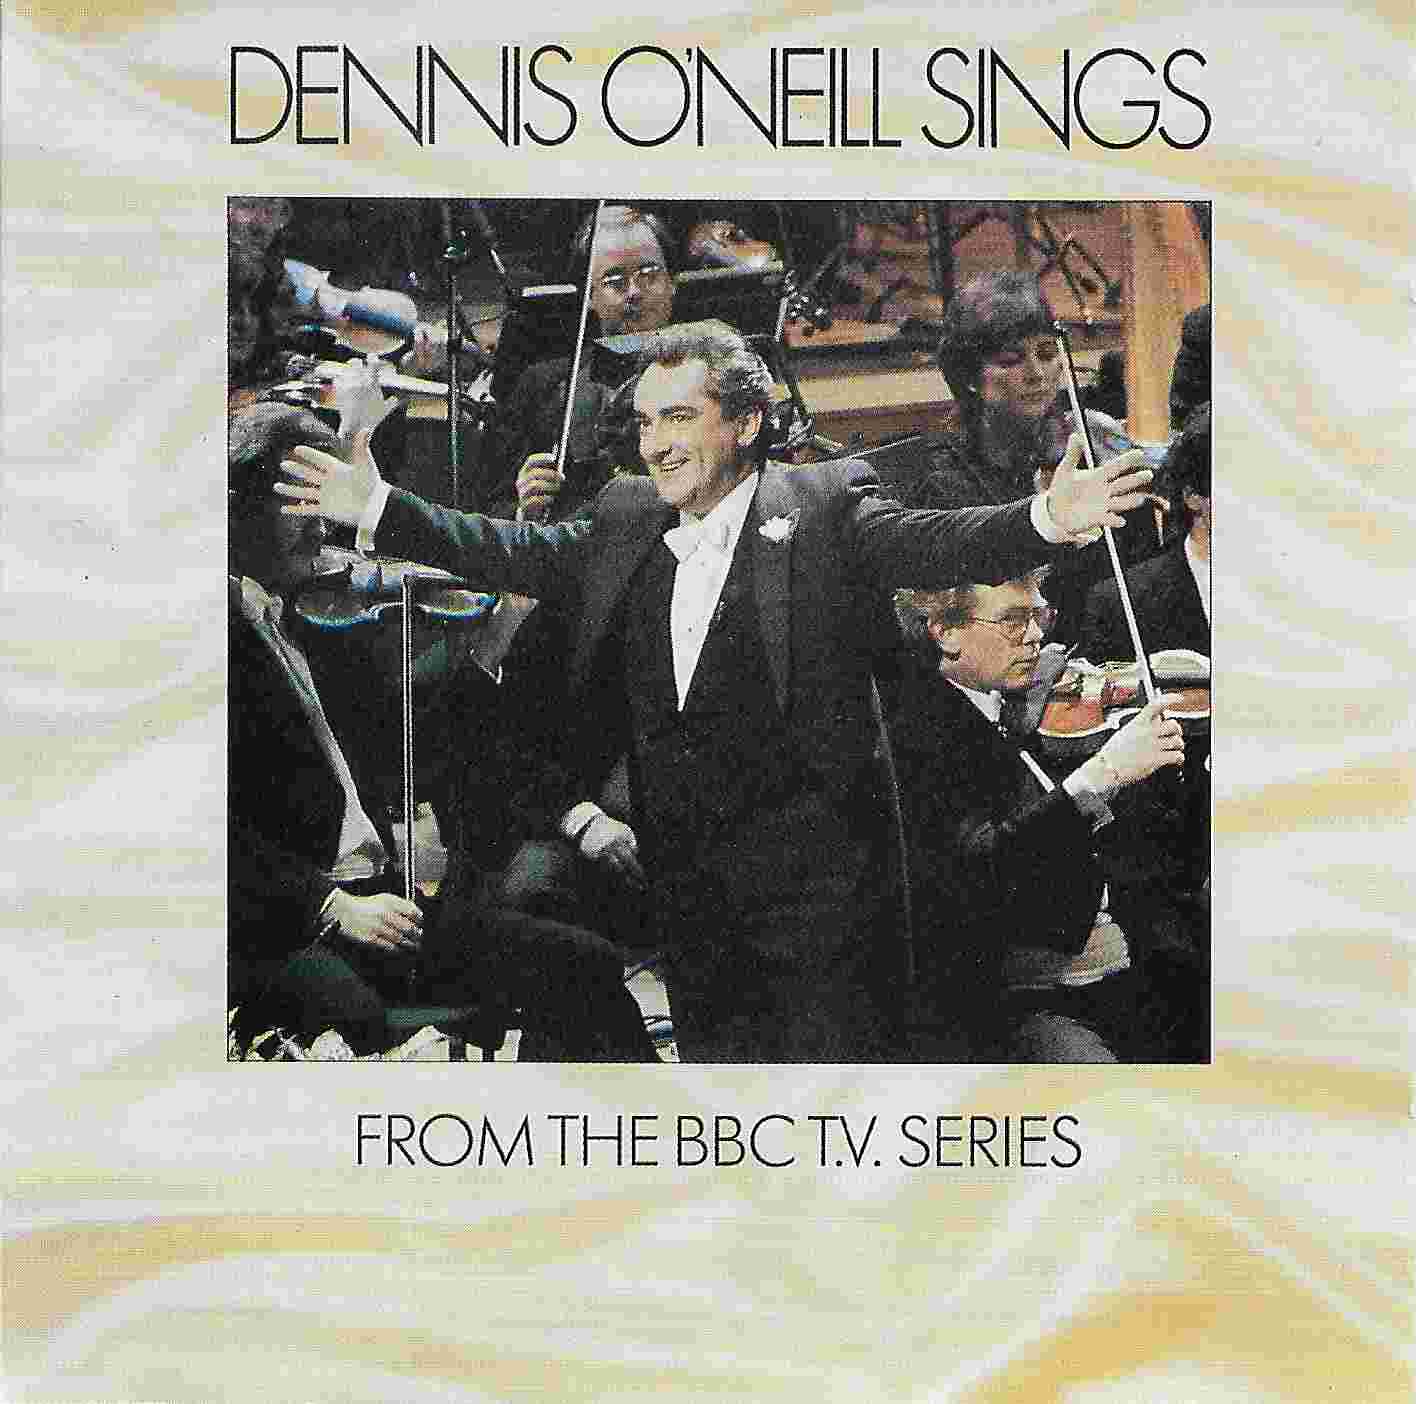 Picture of BBCCD626 Dennis O'Neill sings by artist Dennis O'Neill  from the BBC cds - Records and Tapes library